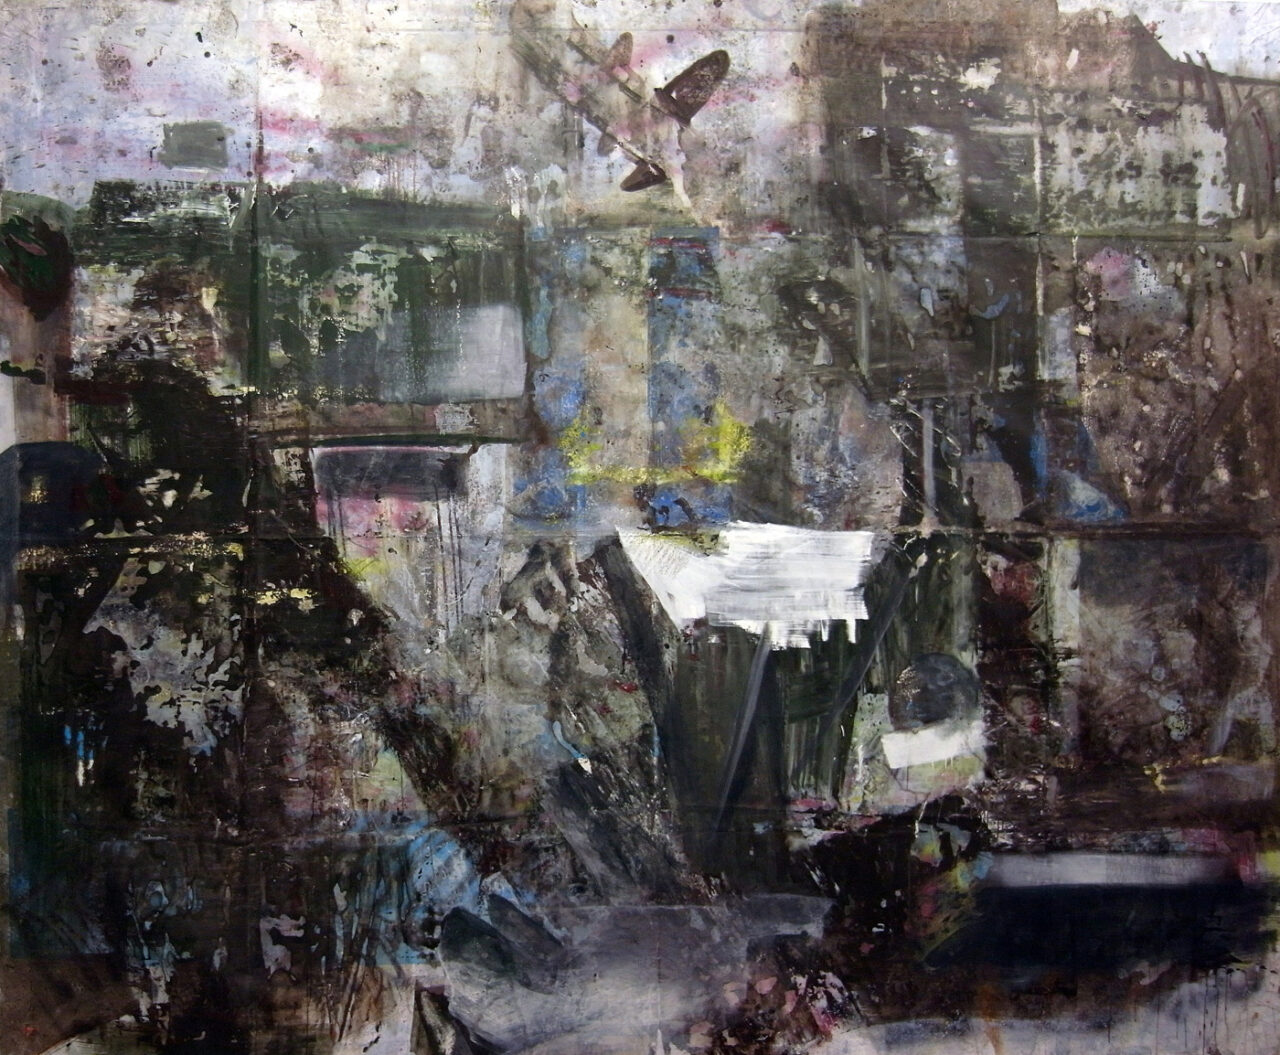 O.T. 2011-21, Oil on Canvas, 3200/5000 cm